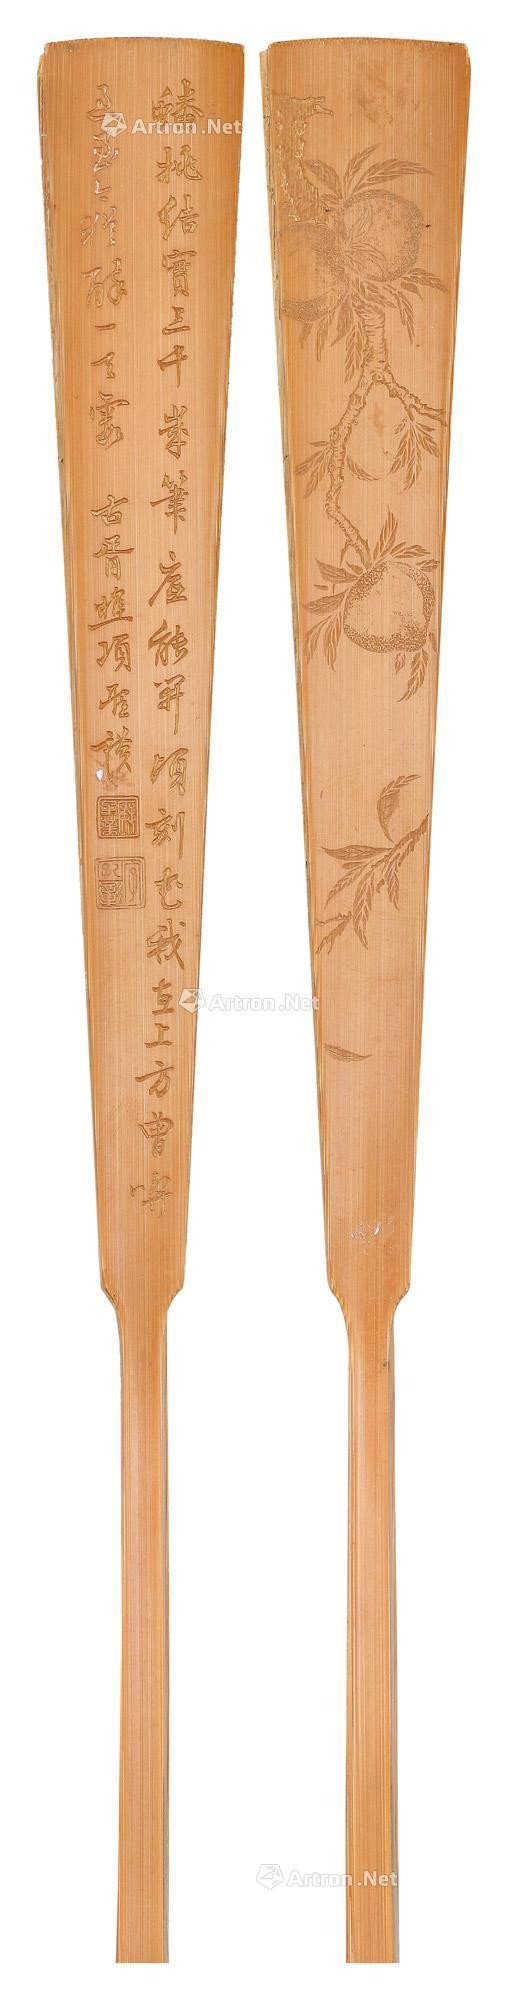 A BAMBOO FAN RIB CARVED WITH XIANG SHENGMO’S PEACHES AND CALLIGRAPHY IN RUNNING SCRIPT